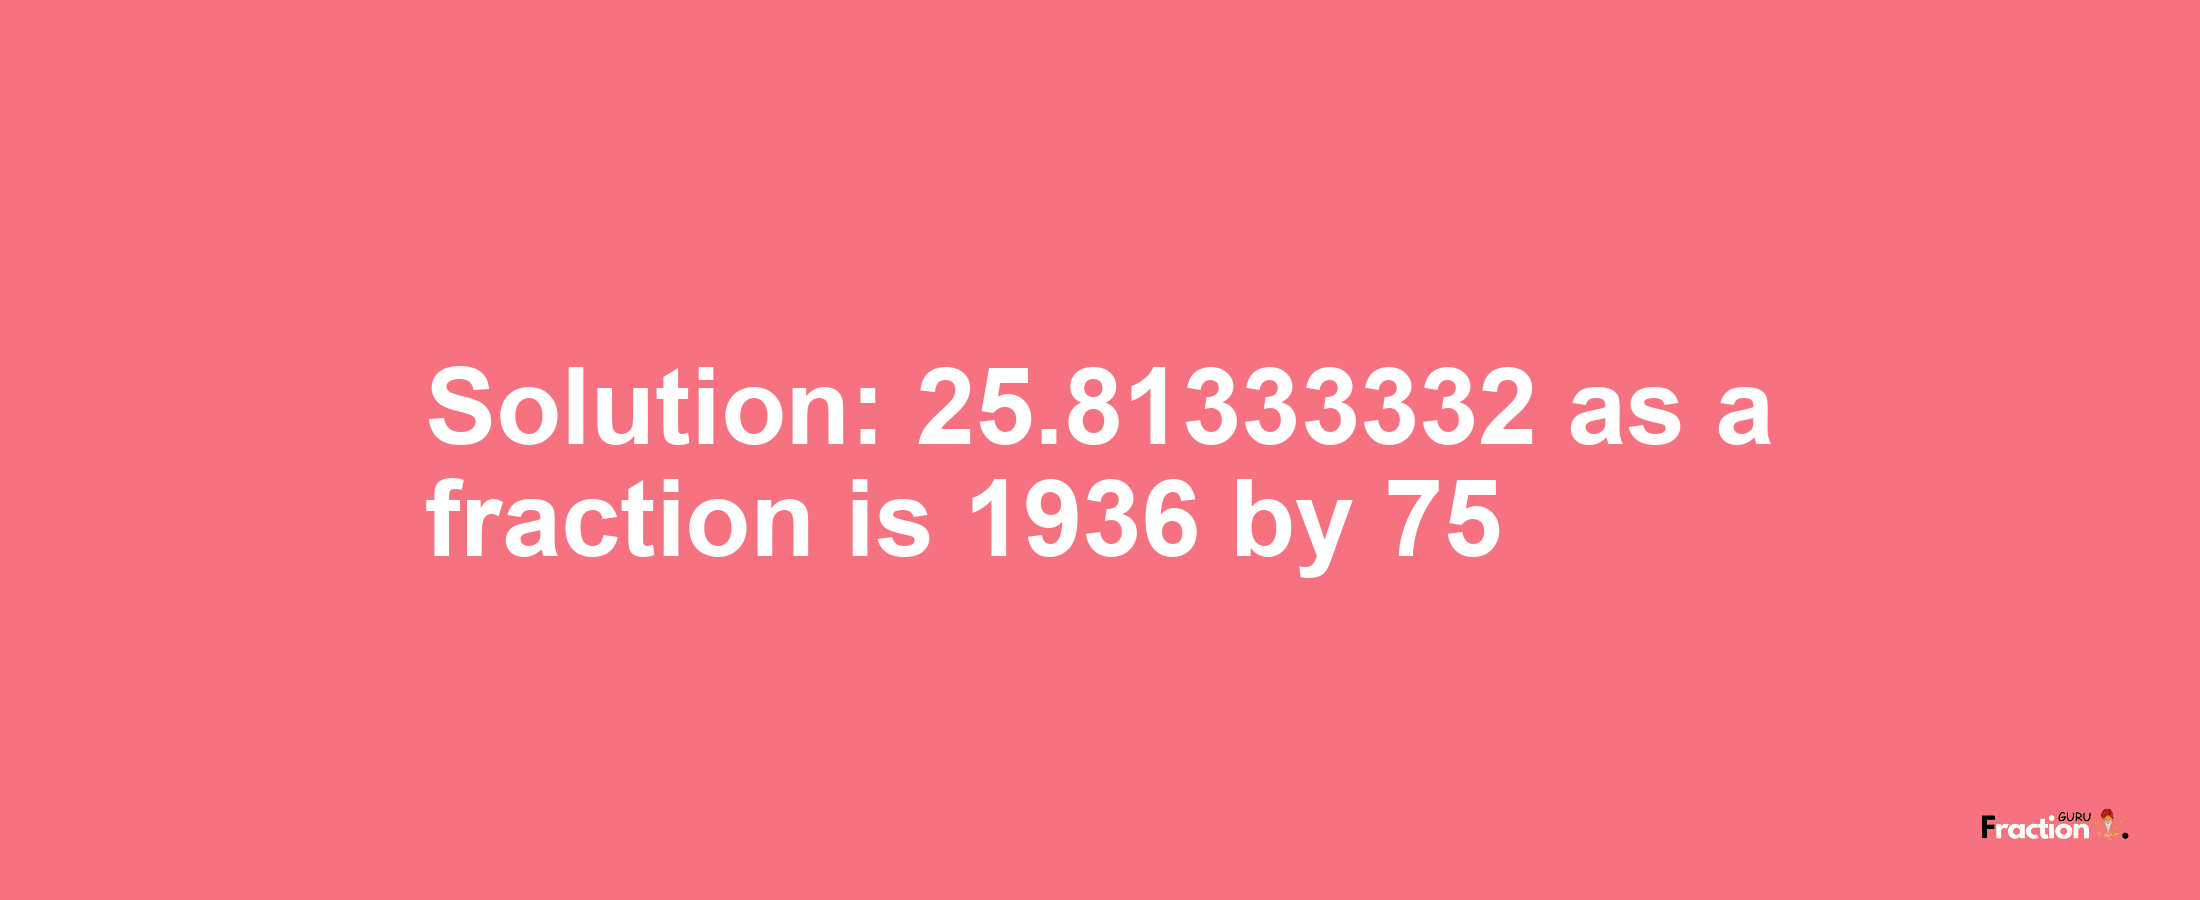 Solution:25.81333332 as a fraction is 1936/75